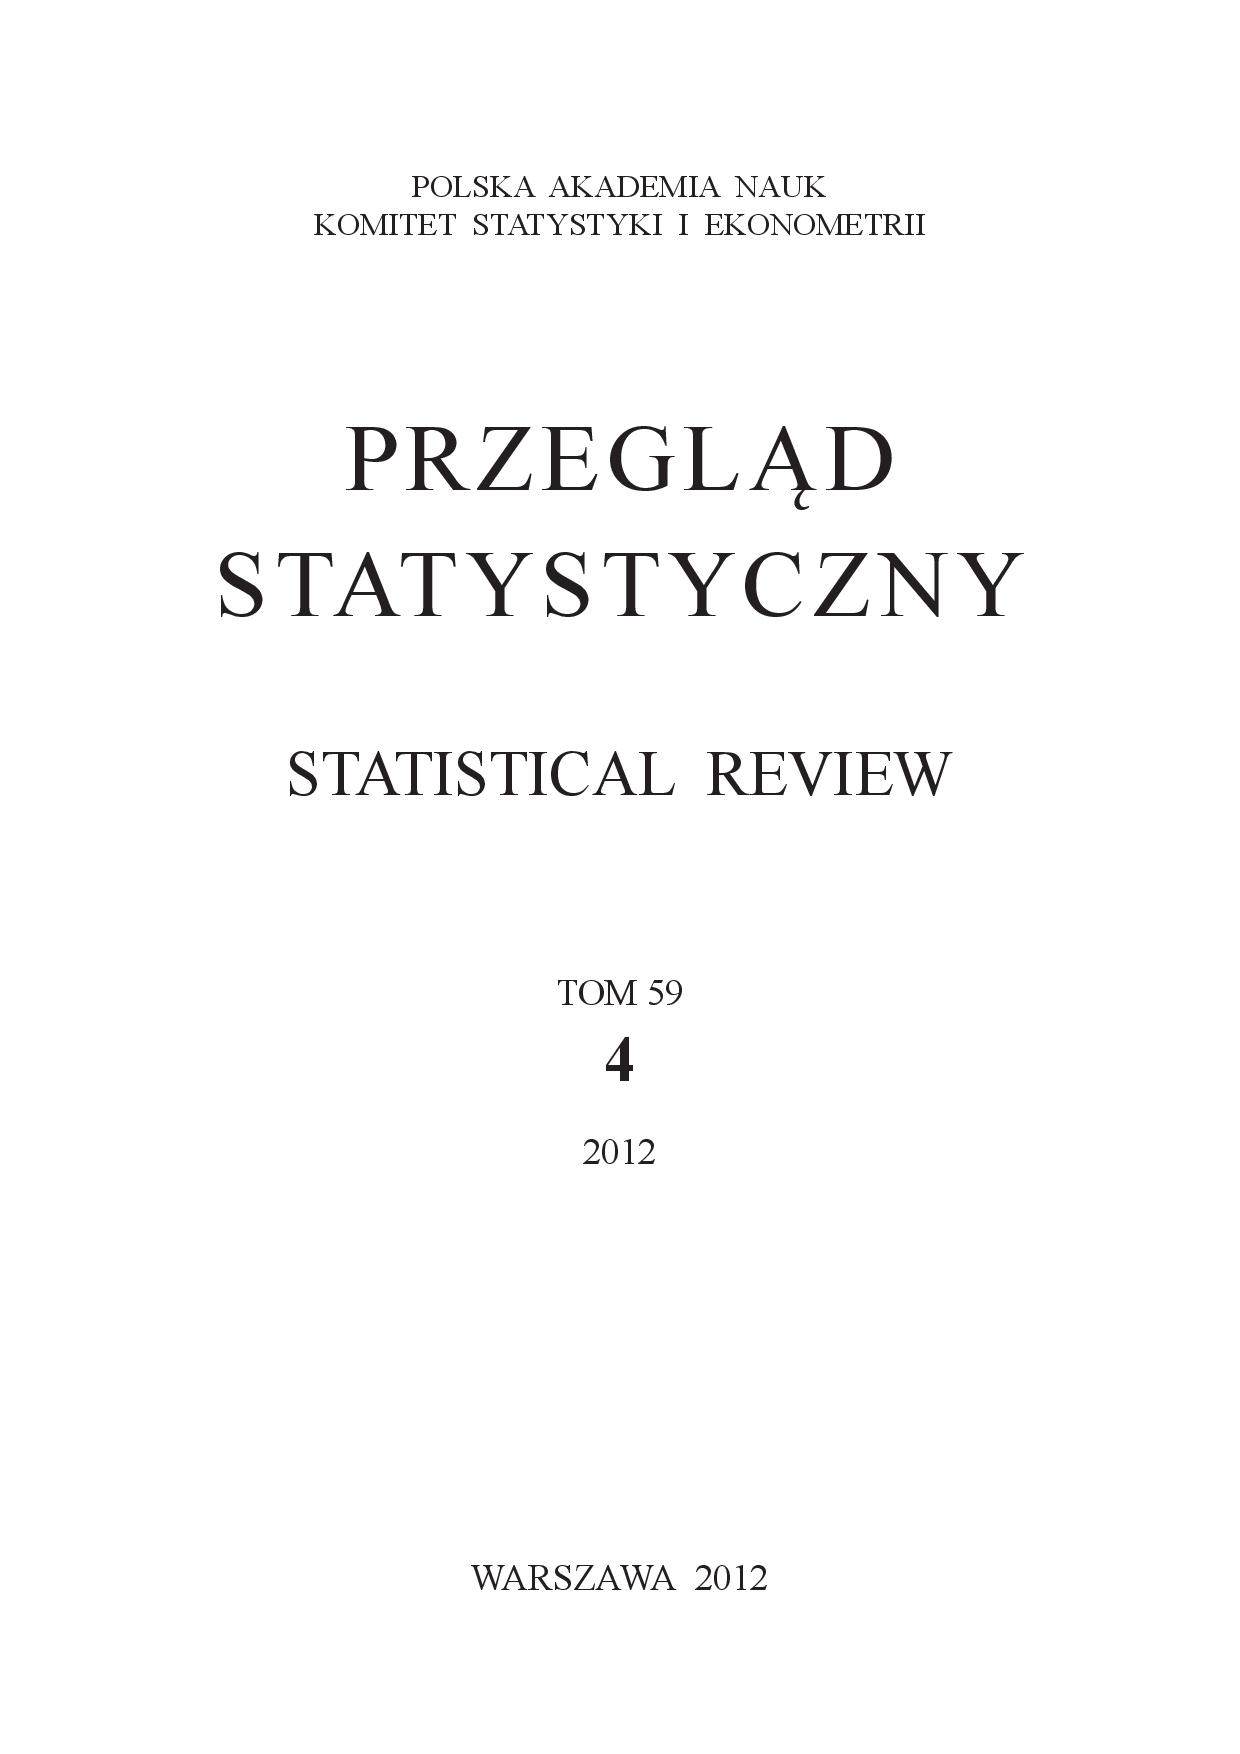 Macroeconomic Model of Crime and of the Law Enforcement System for Poland. Equations’ Specification and the Results Cover Image